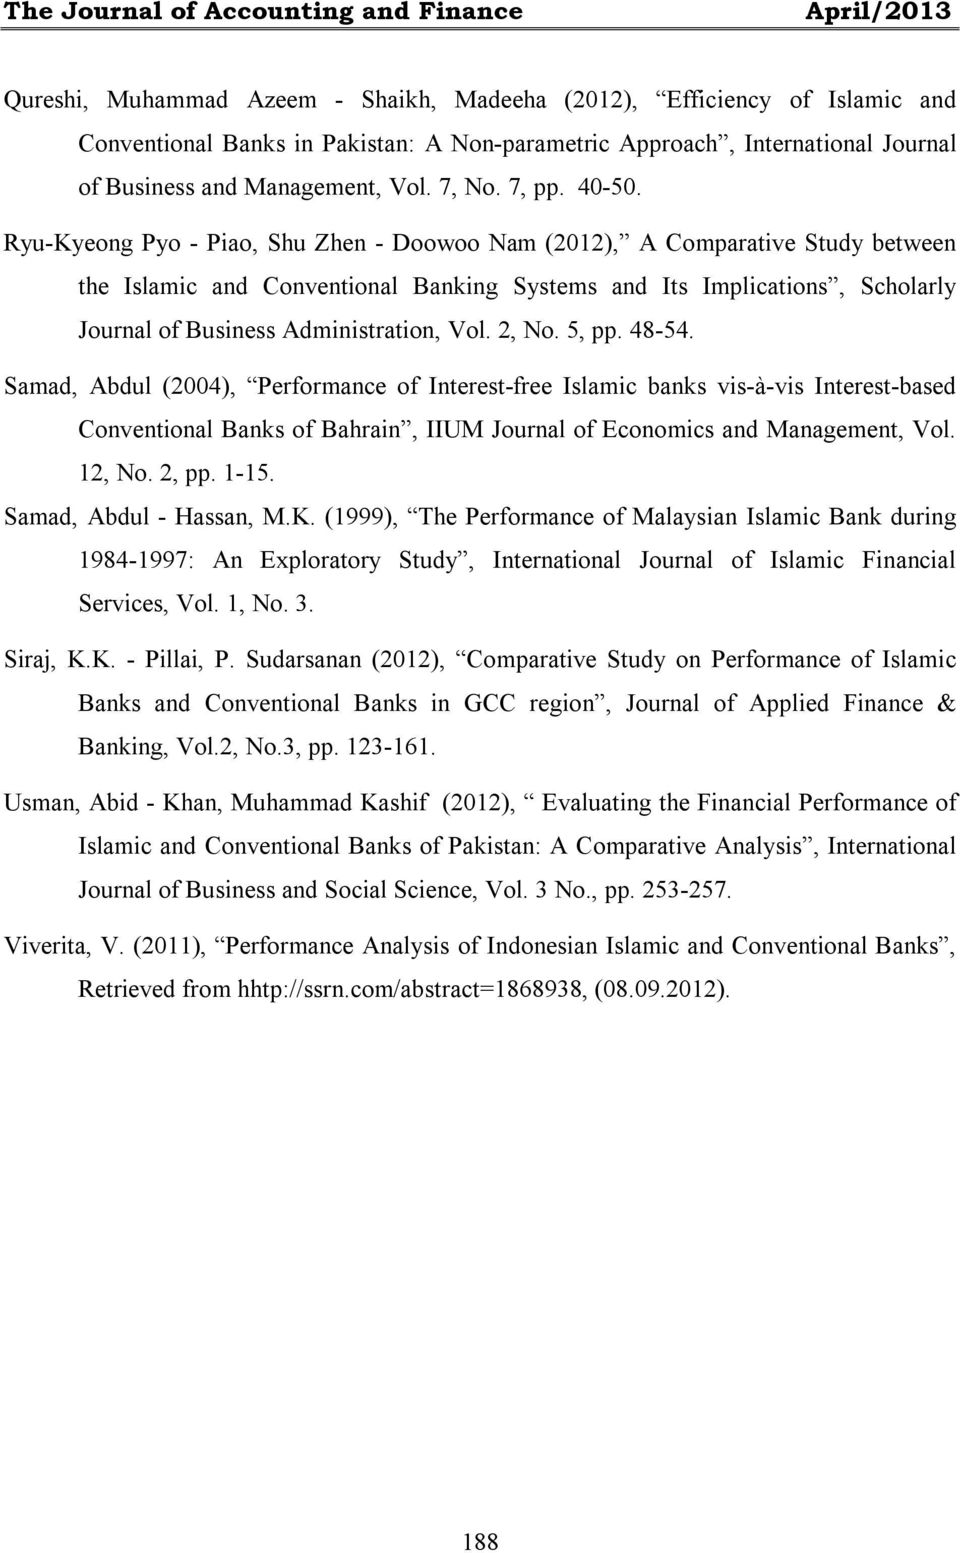 Ryu-Kyeong Pyo - Piao, Shu Zhen - Doowoo Nam (2012), A Comparative Study between the Islamic and Conventional Banking Systems and Its Implications, Scholarly Journal of Business Administration, Vol.